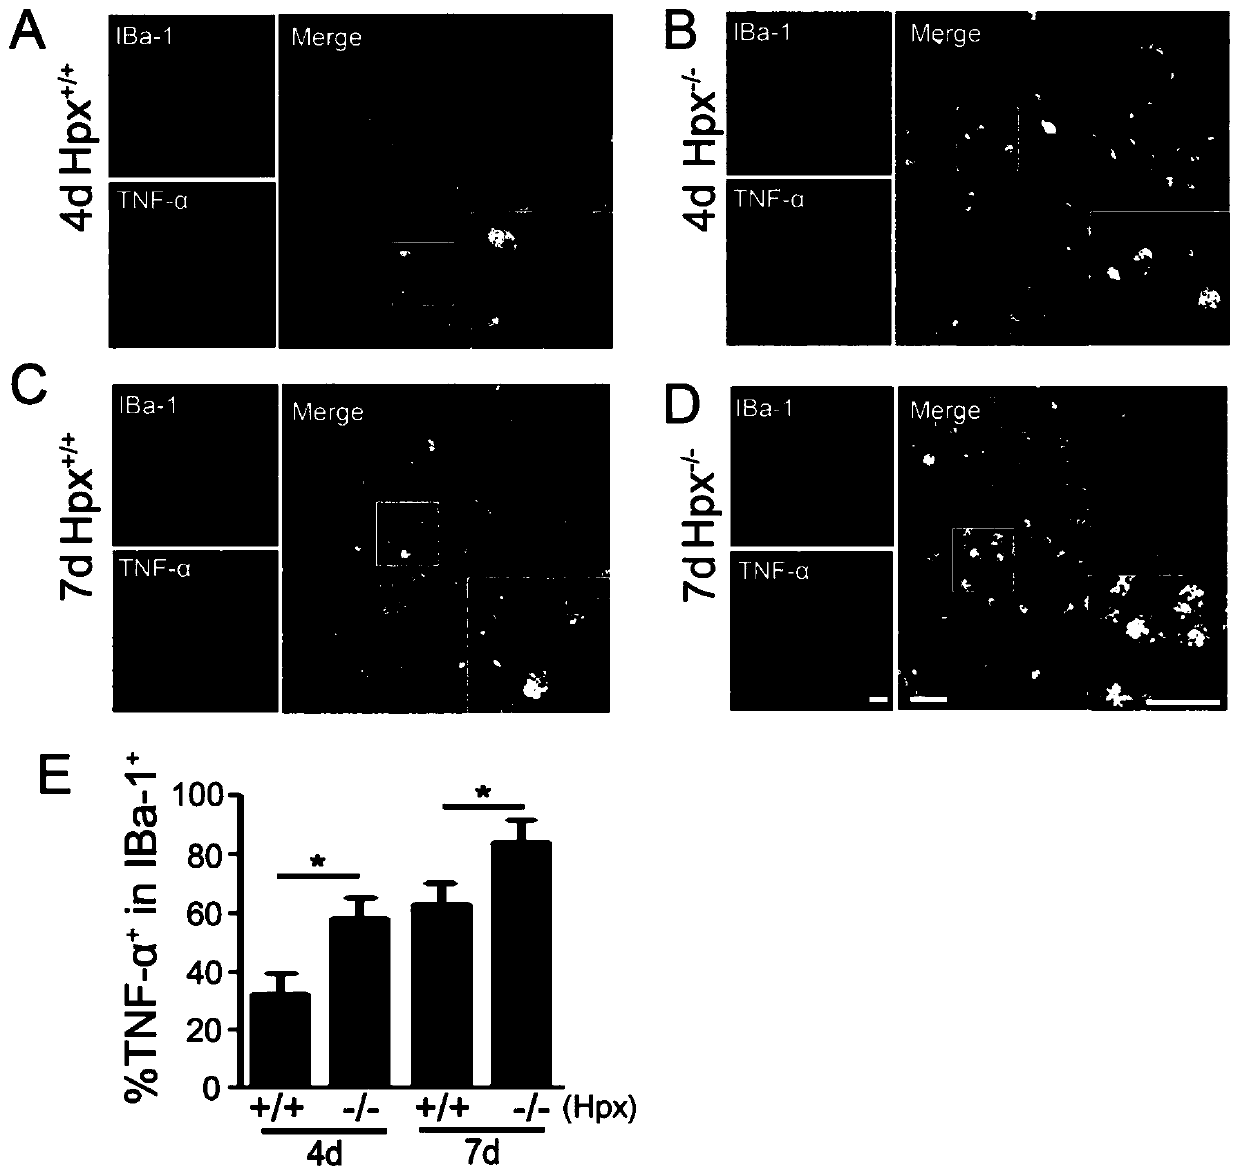 Method and application of hpx protein to induce and maintain selective polarization of microglia